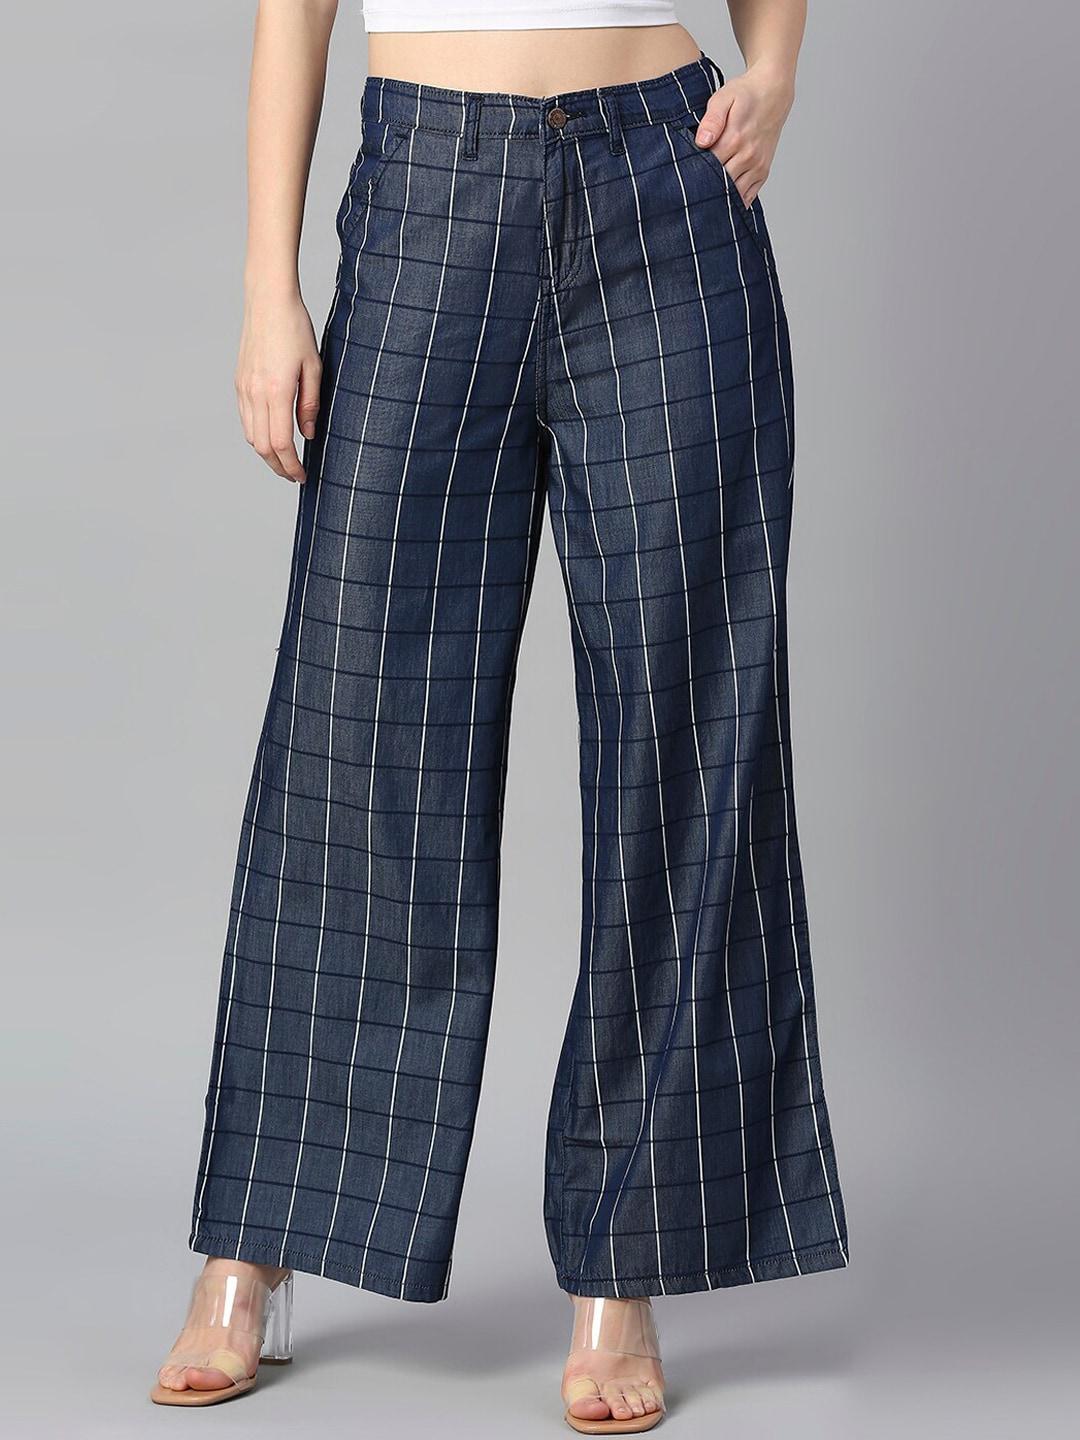 High Star Women Striped Flared High-Rise Trousers